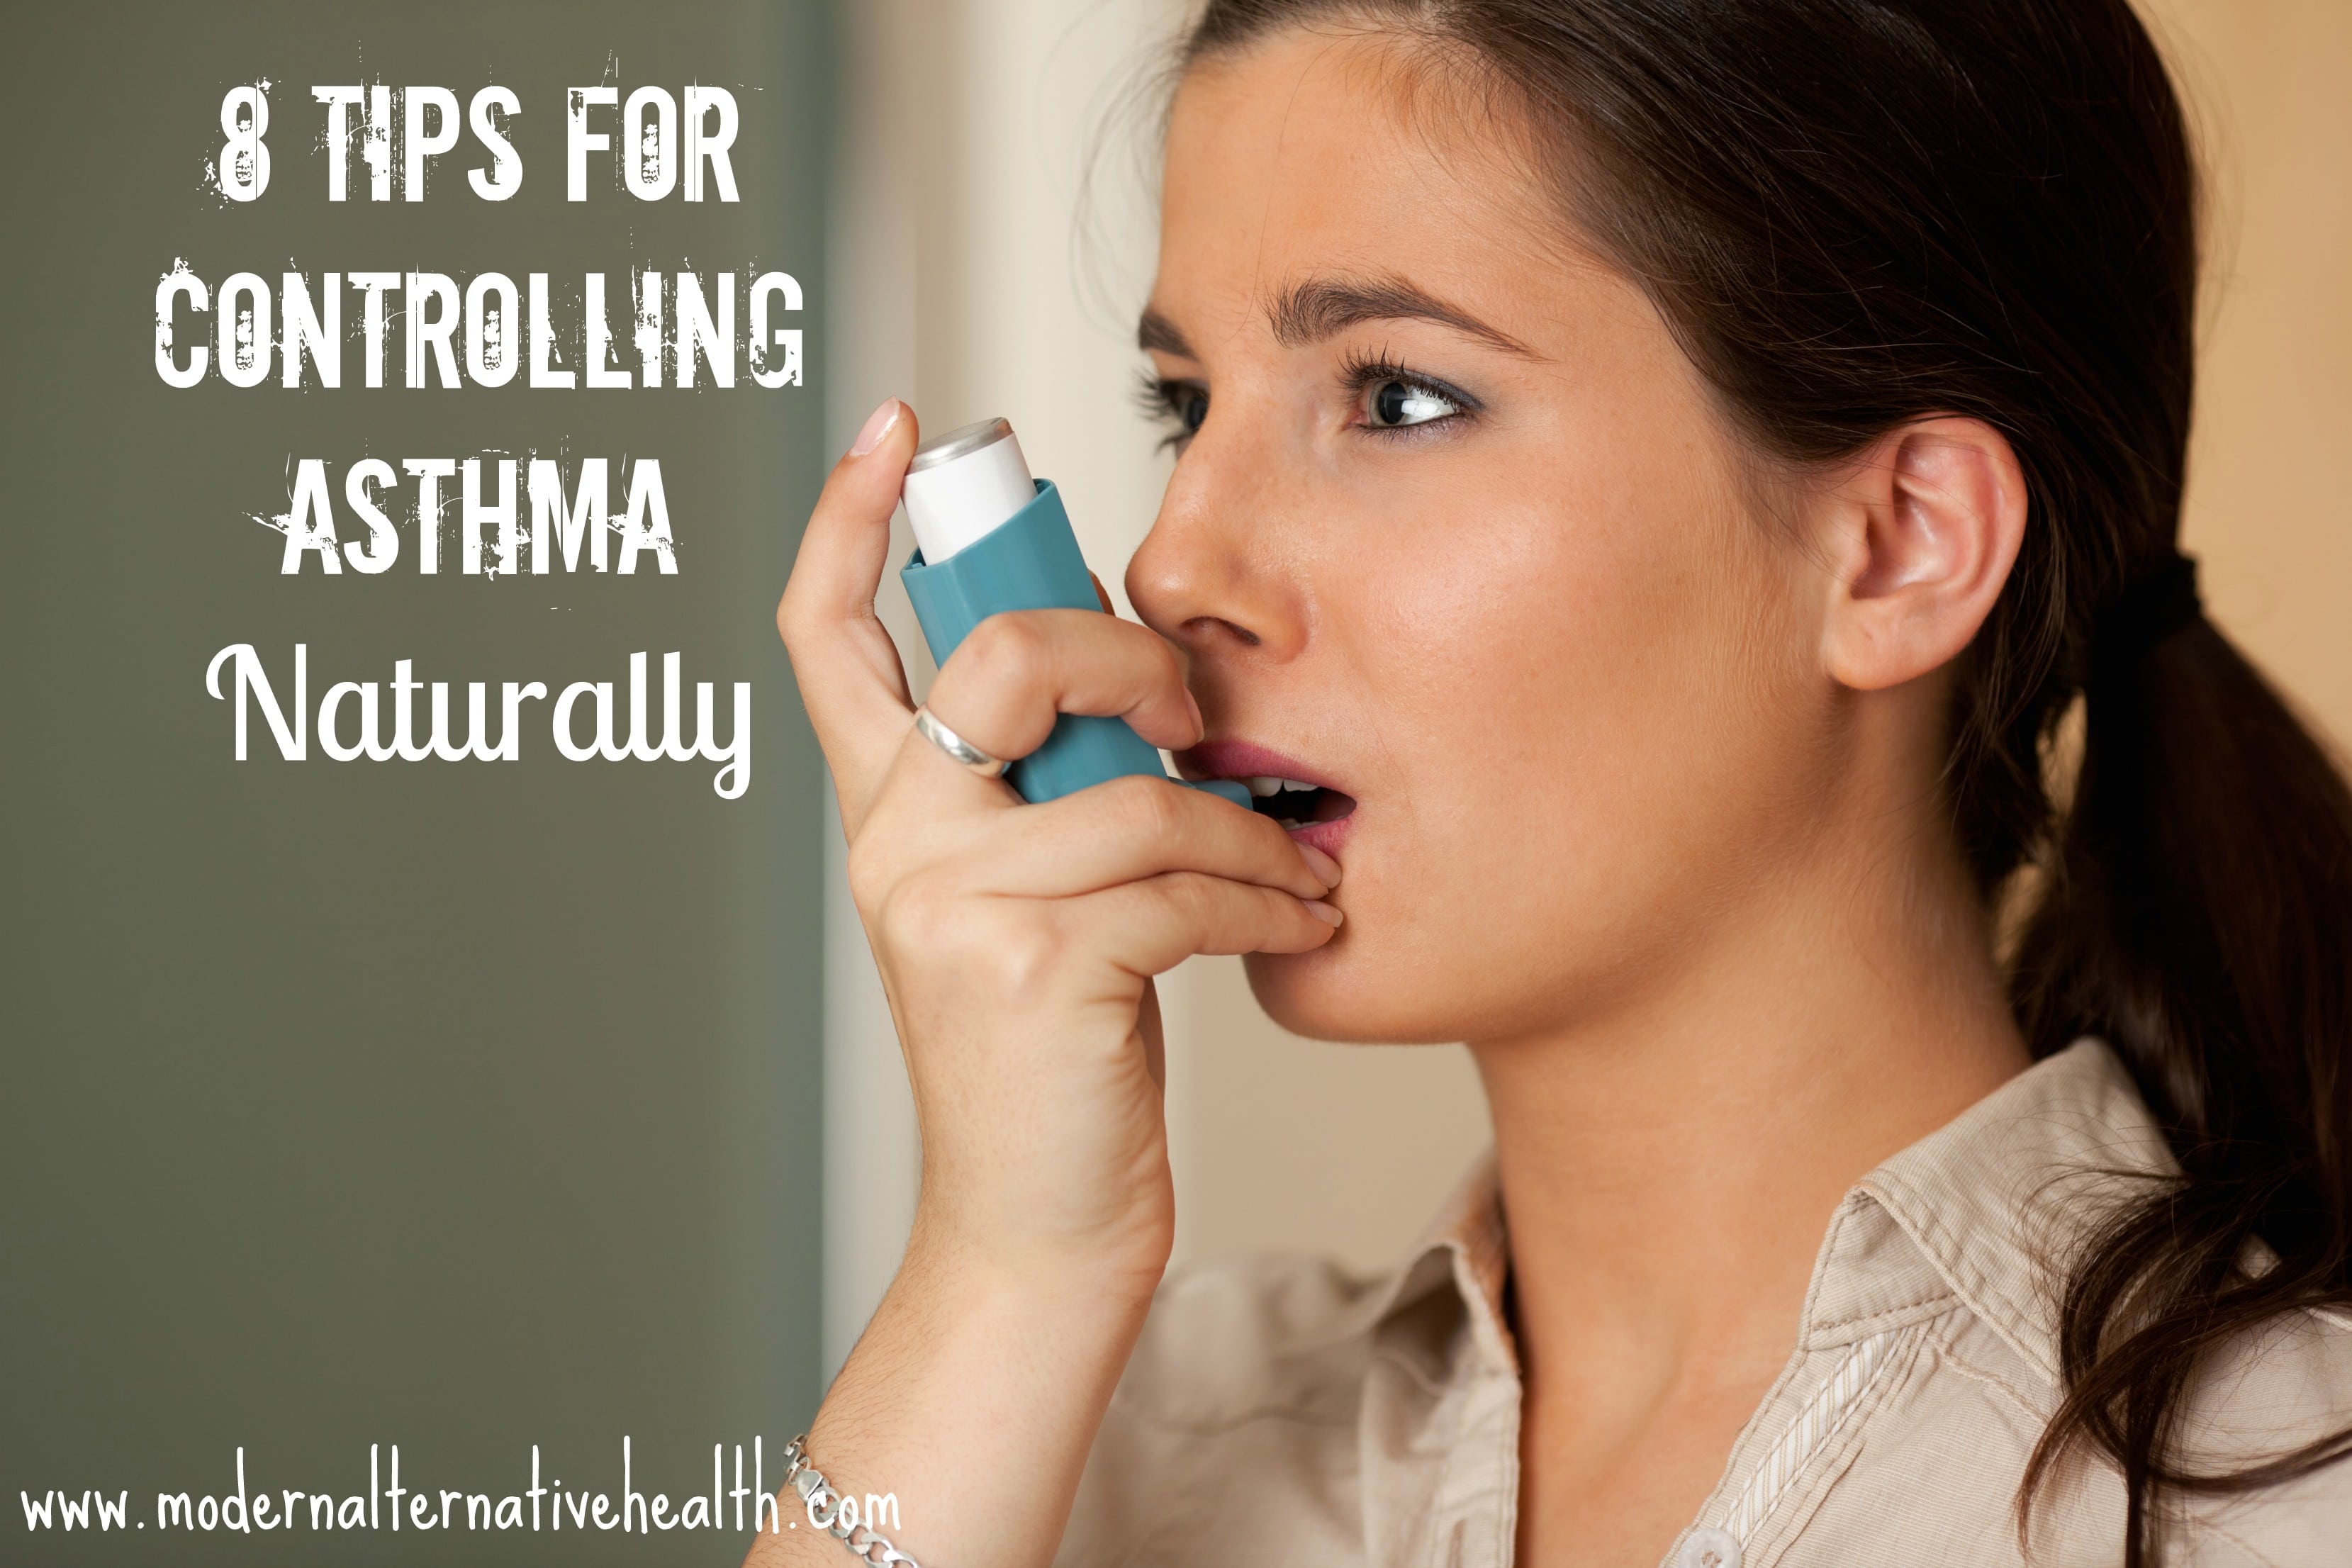 8 Tips for Controlling Asthma Naturally